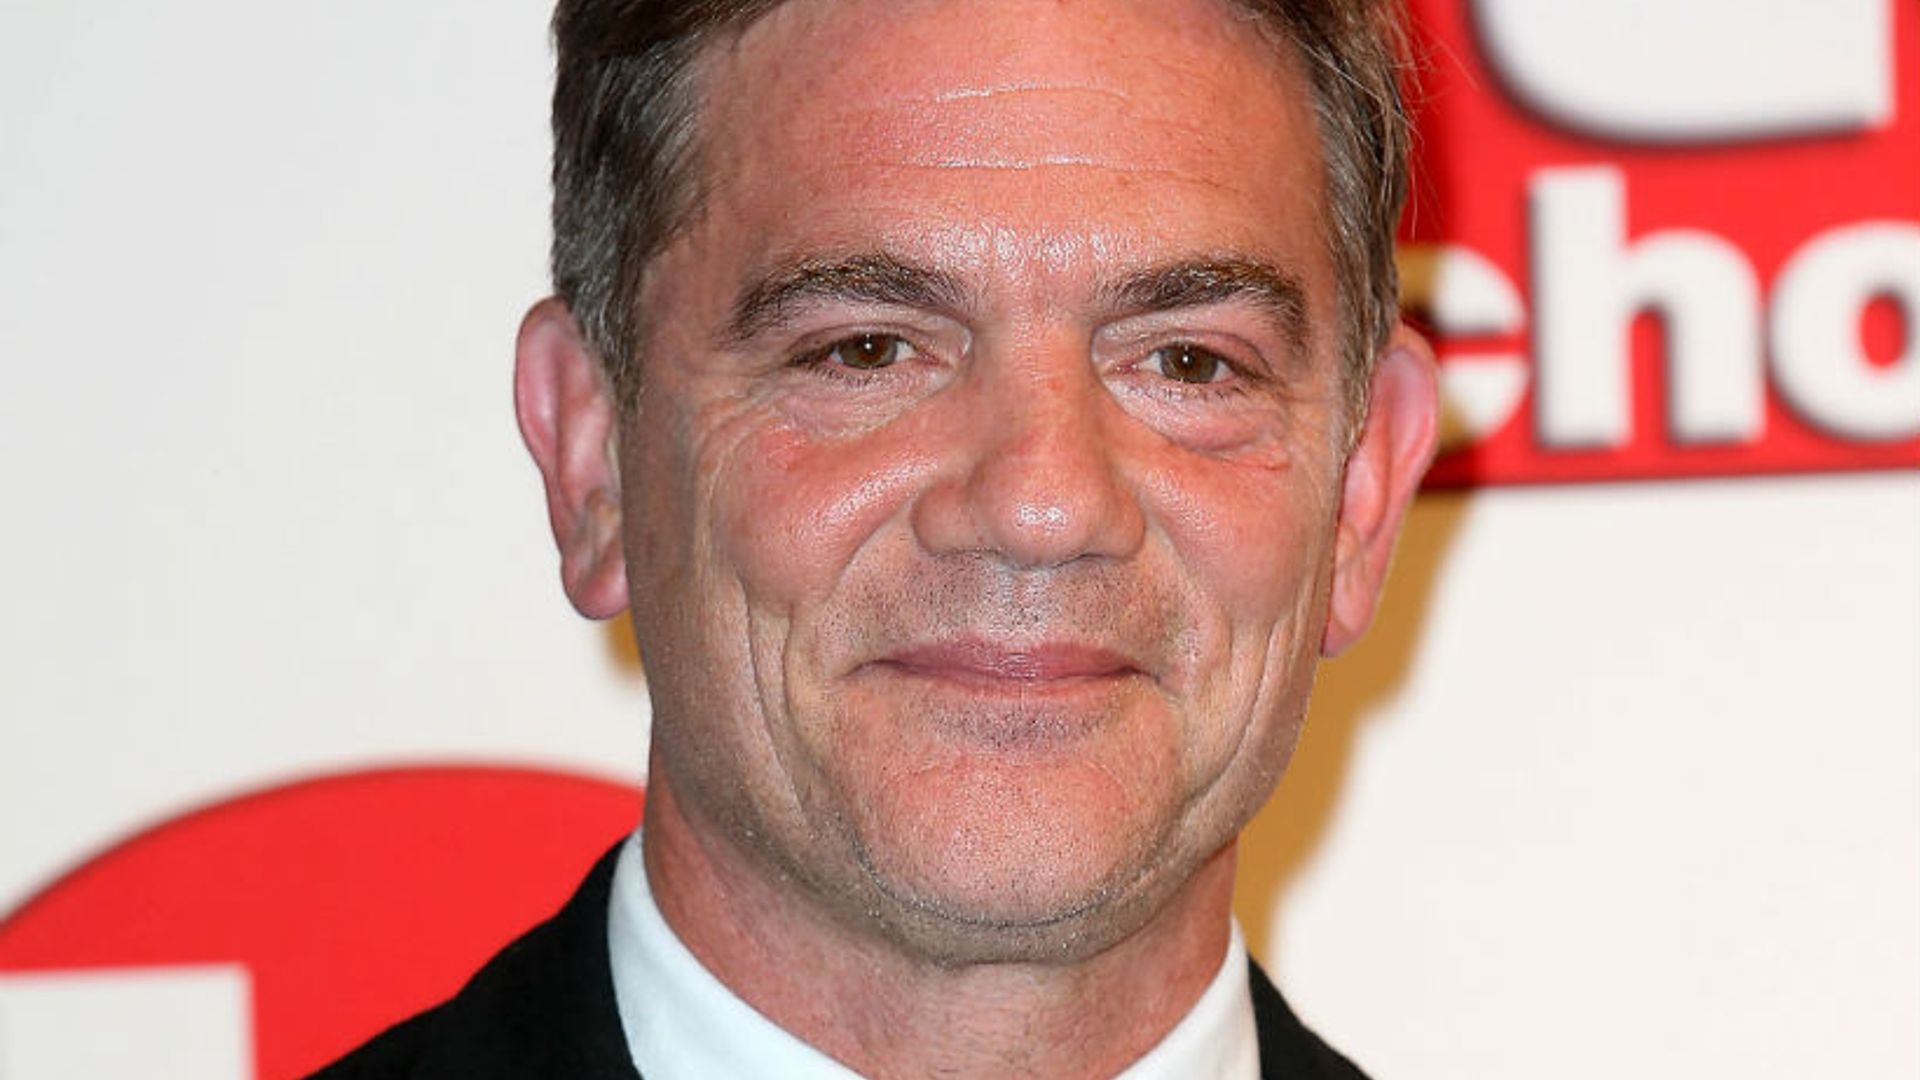 John Michie marks his birthday with emotional tribute to daughter